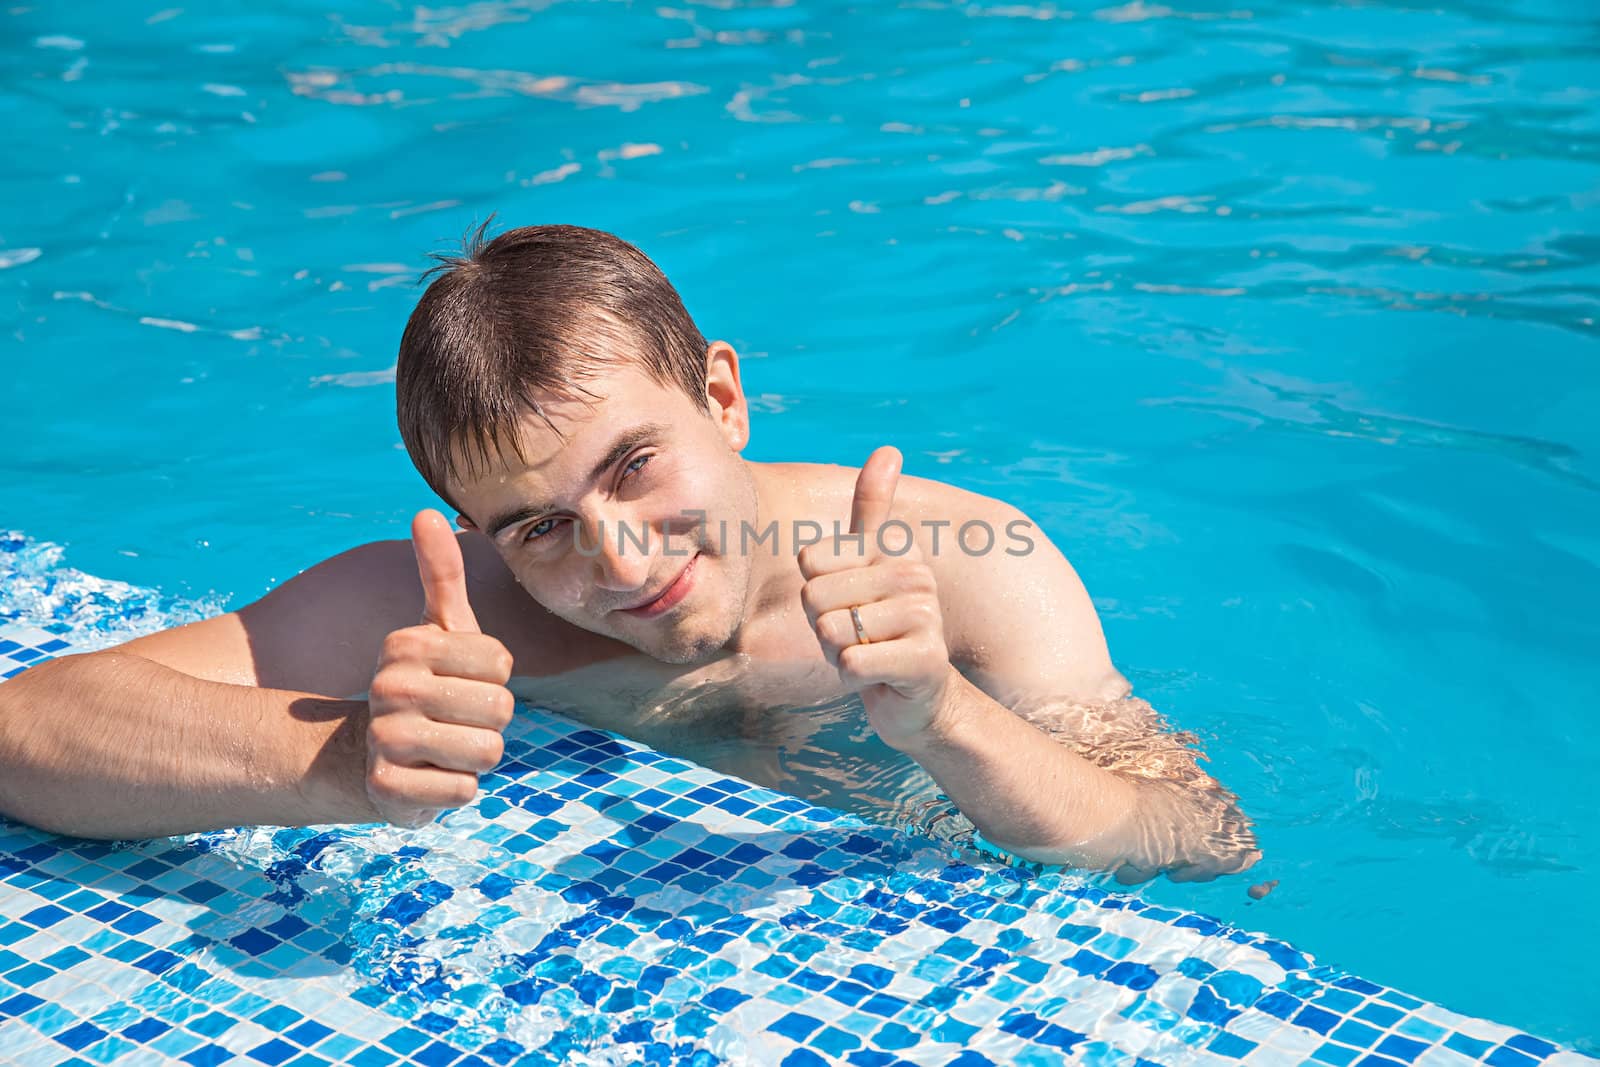 Healthy lifestyle. The young man is swimming in a pool on a sunny day